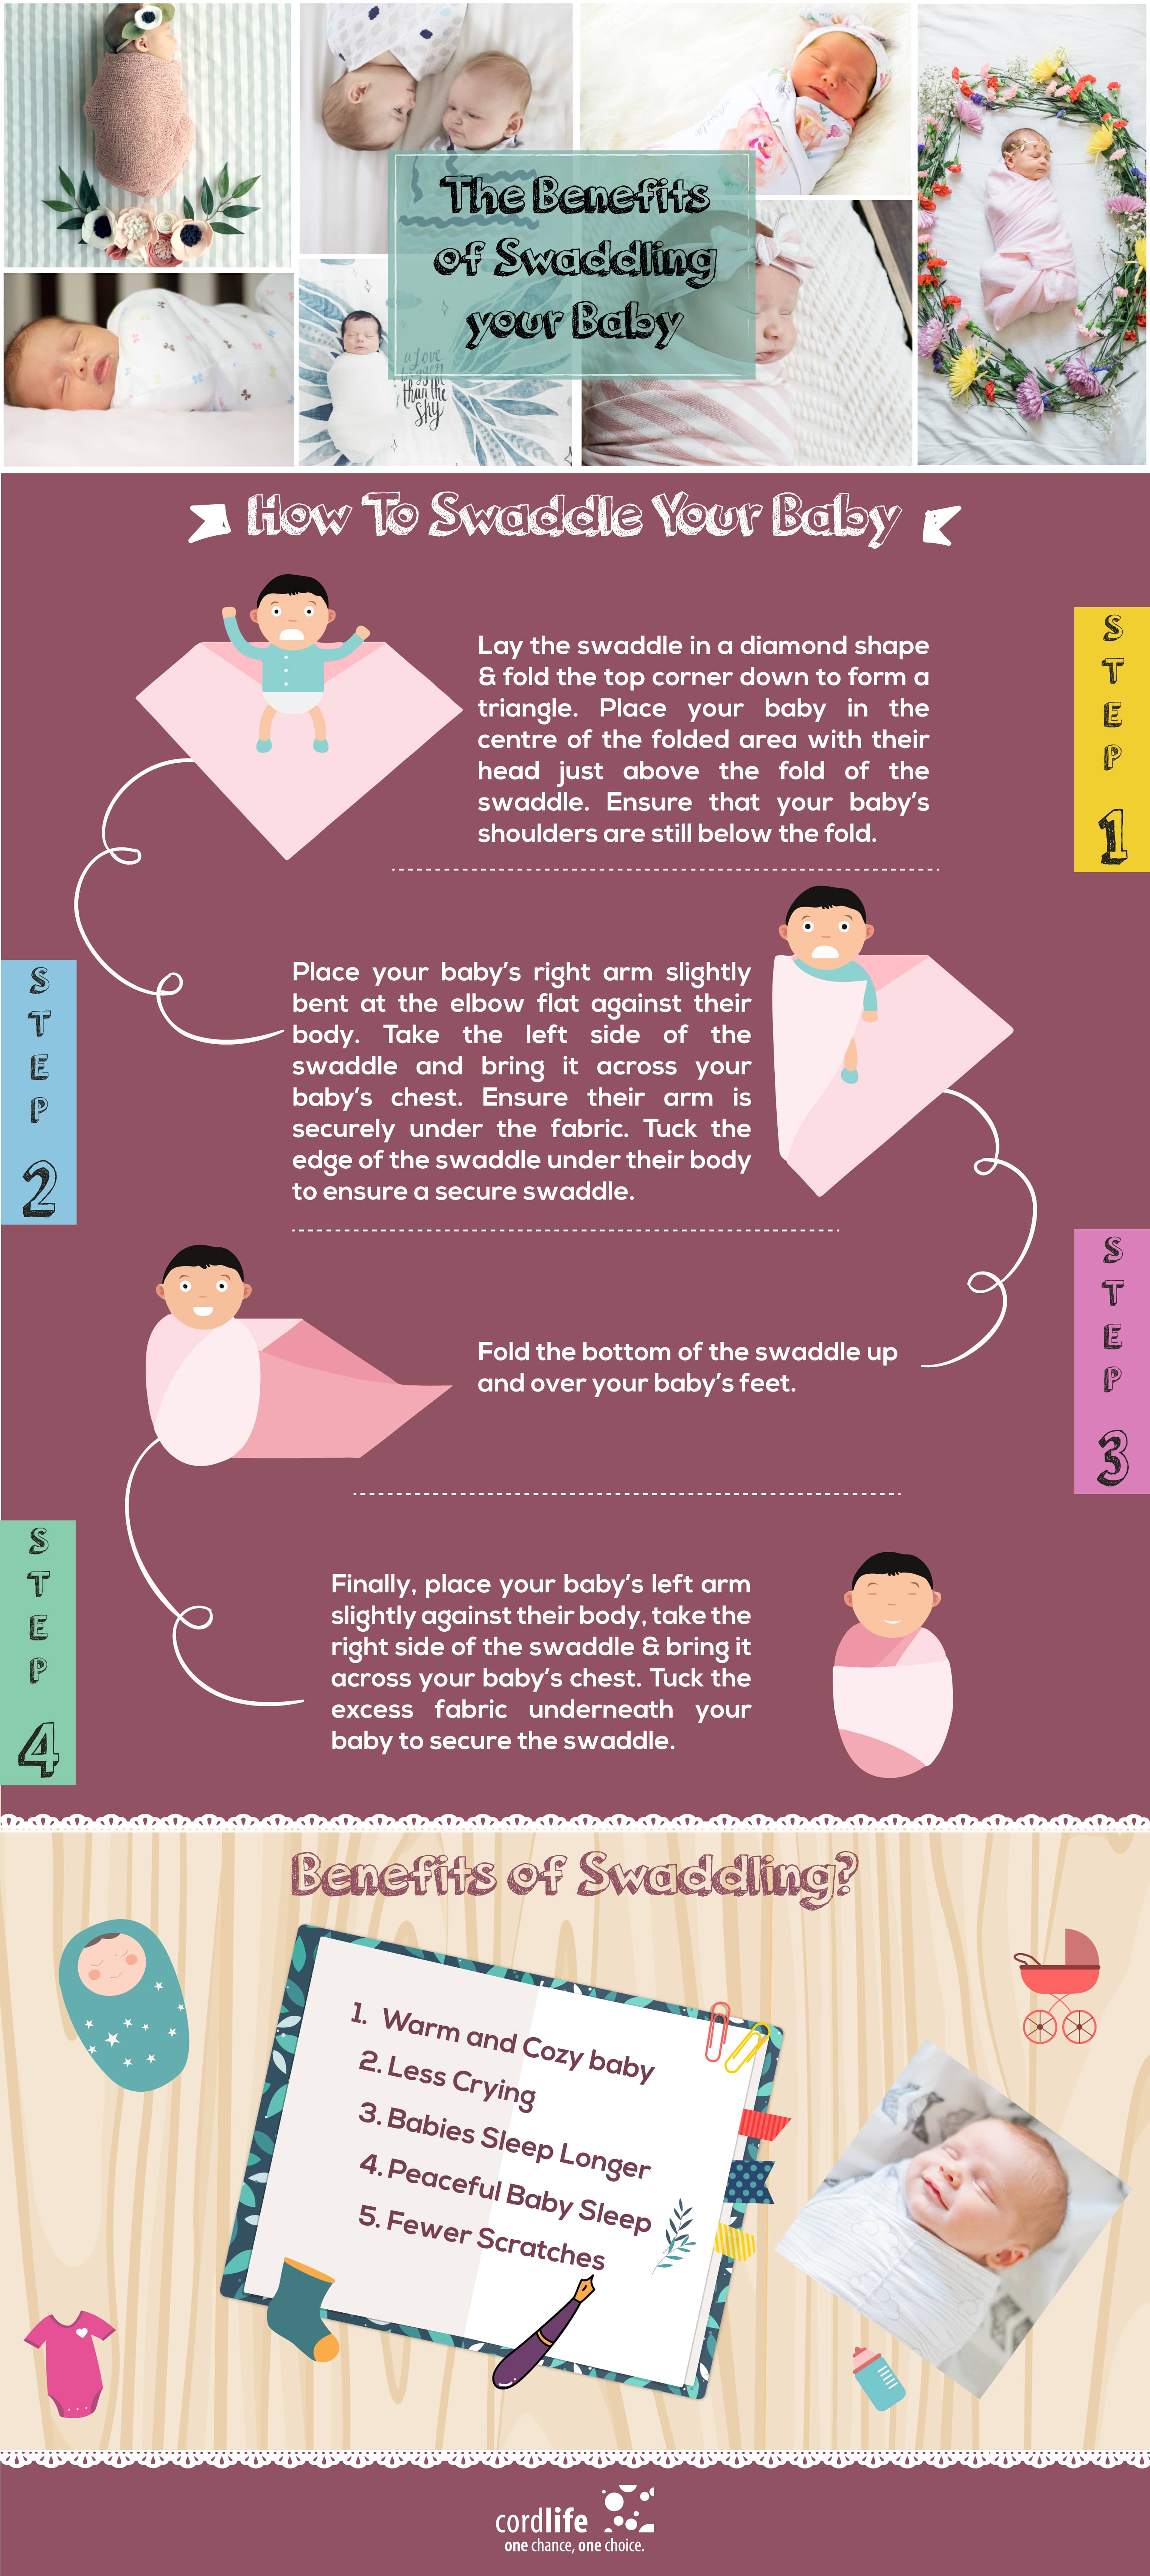 The Benefits of Swaddling your Baby